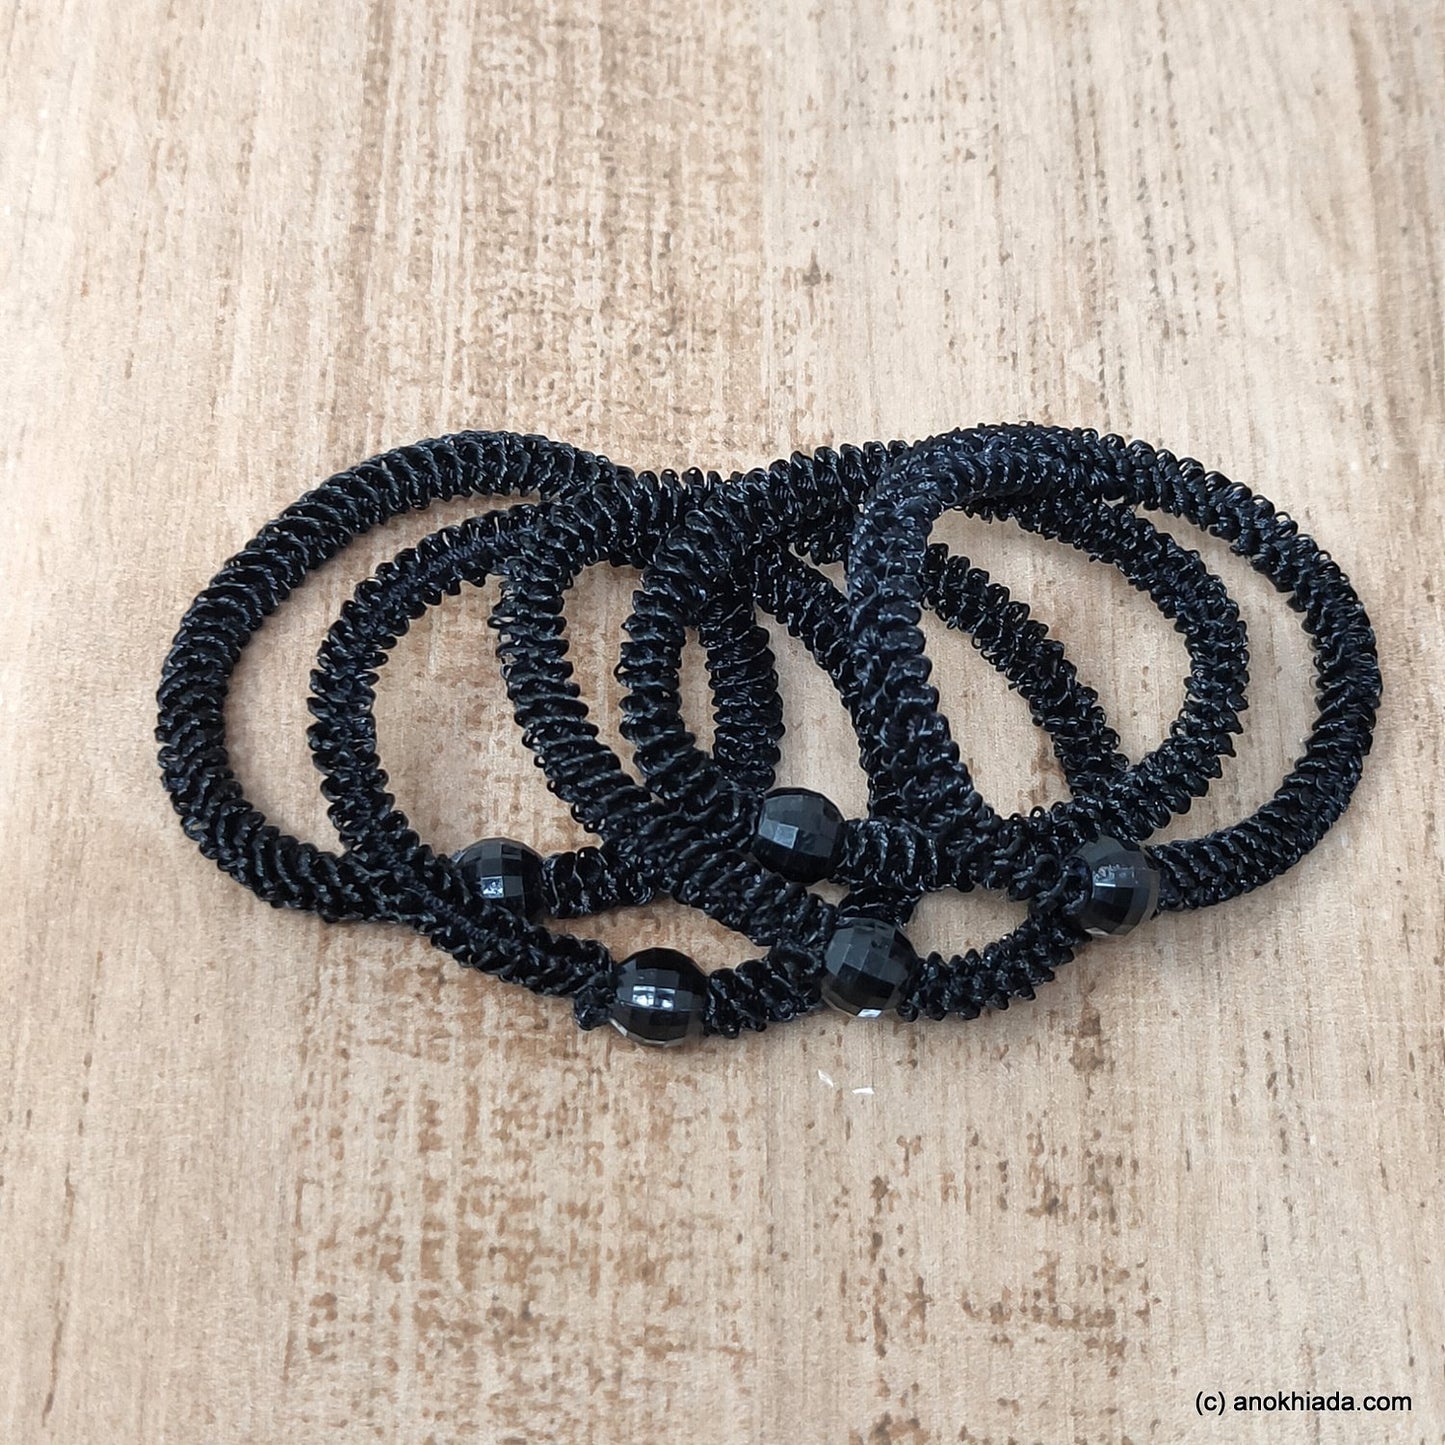 Anokhi Ada small size Black Elastic Rubber for Girls and Women (15-27a, Ponytail Holders, 5 Pcs of Black Colour Rubber)